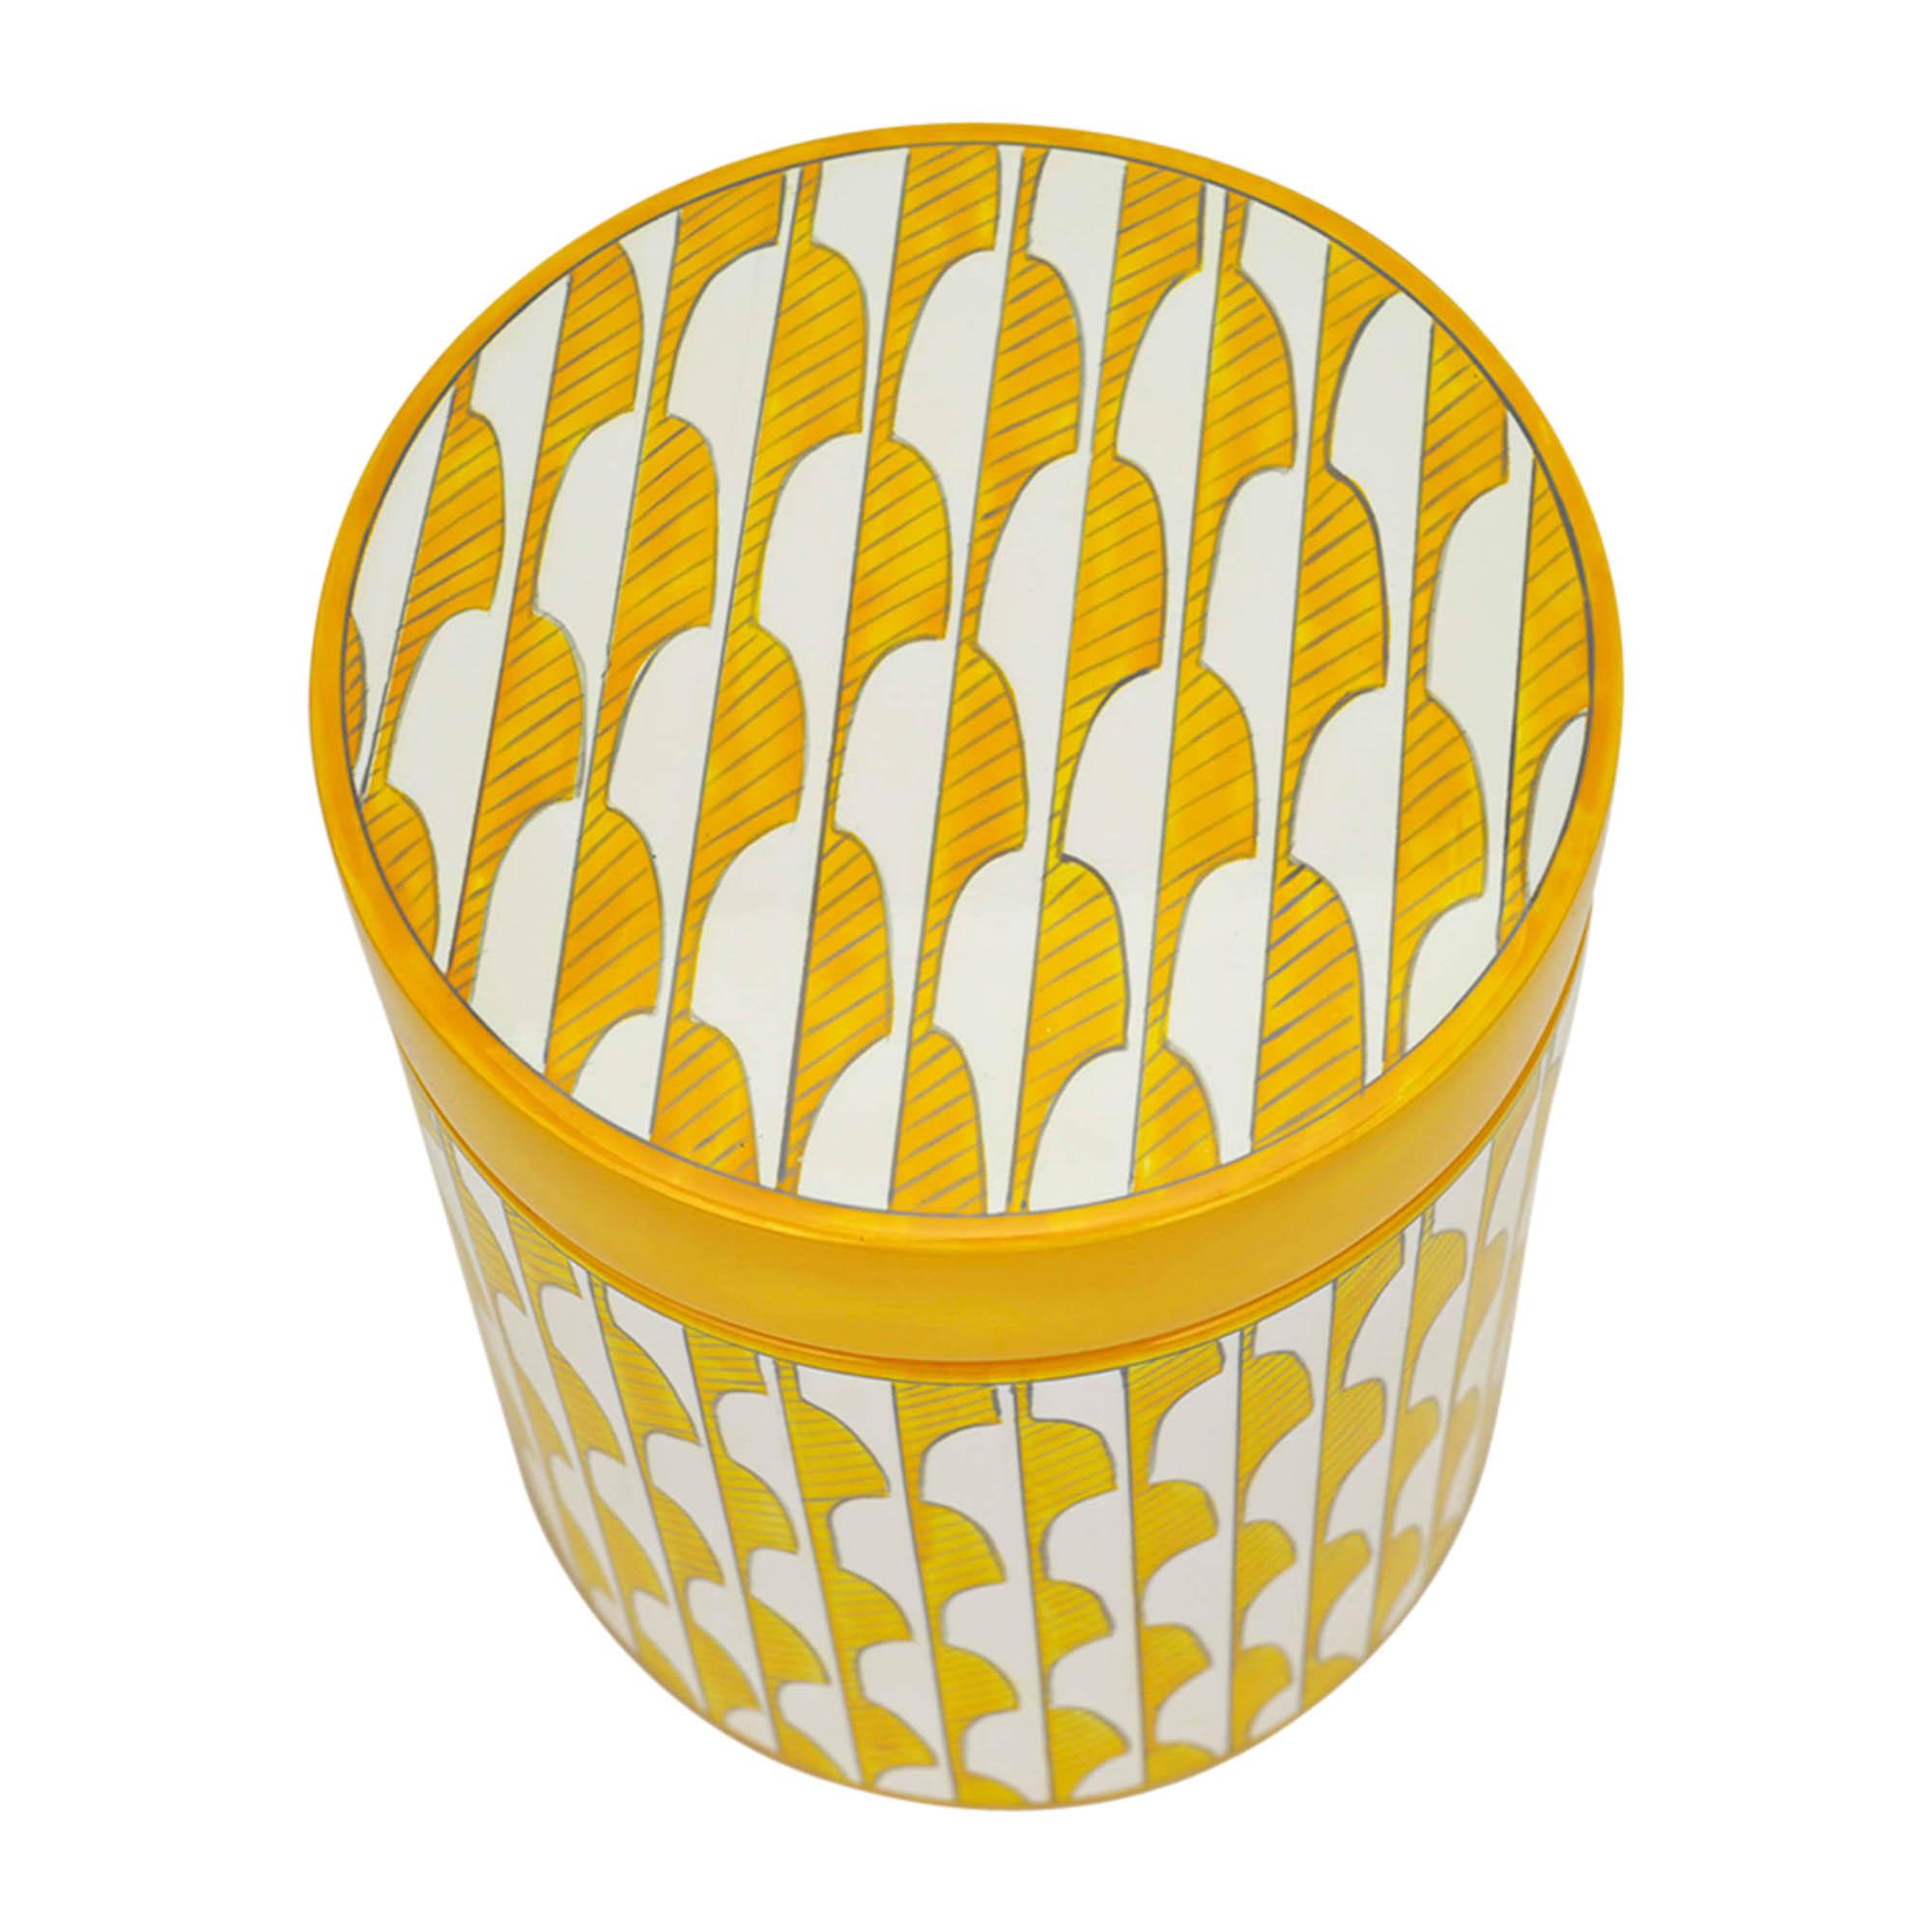 Mightychic offers an Hermes Soleil d'Hermes Tea Box featured in Jaune.
A unique and beautiful piece
Hand painted lacquered wood with palm shapes evoking a Mediterranean summer.
Soleil d'Hermes designed by Arielle de Brichambaut.
Airtight tin